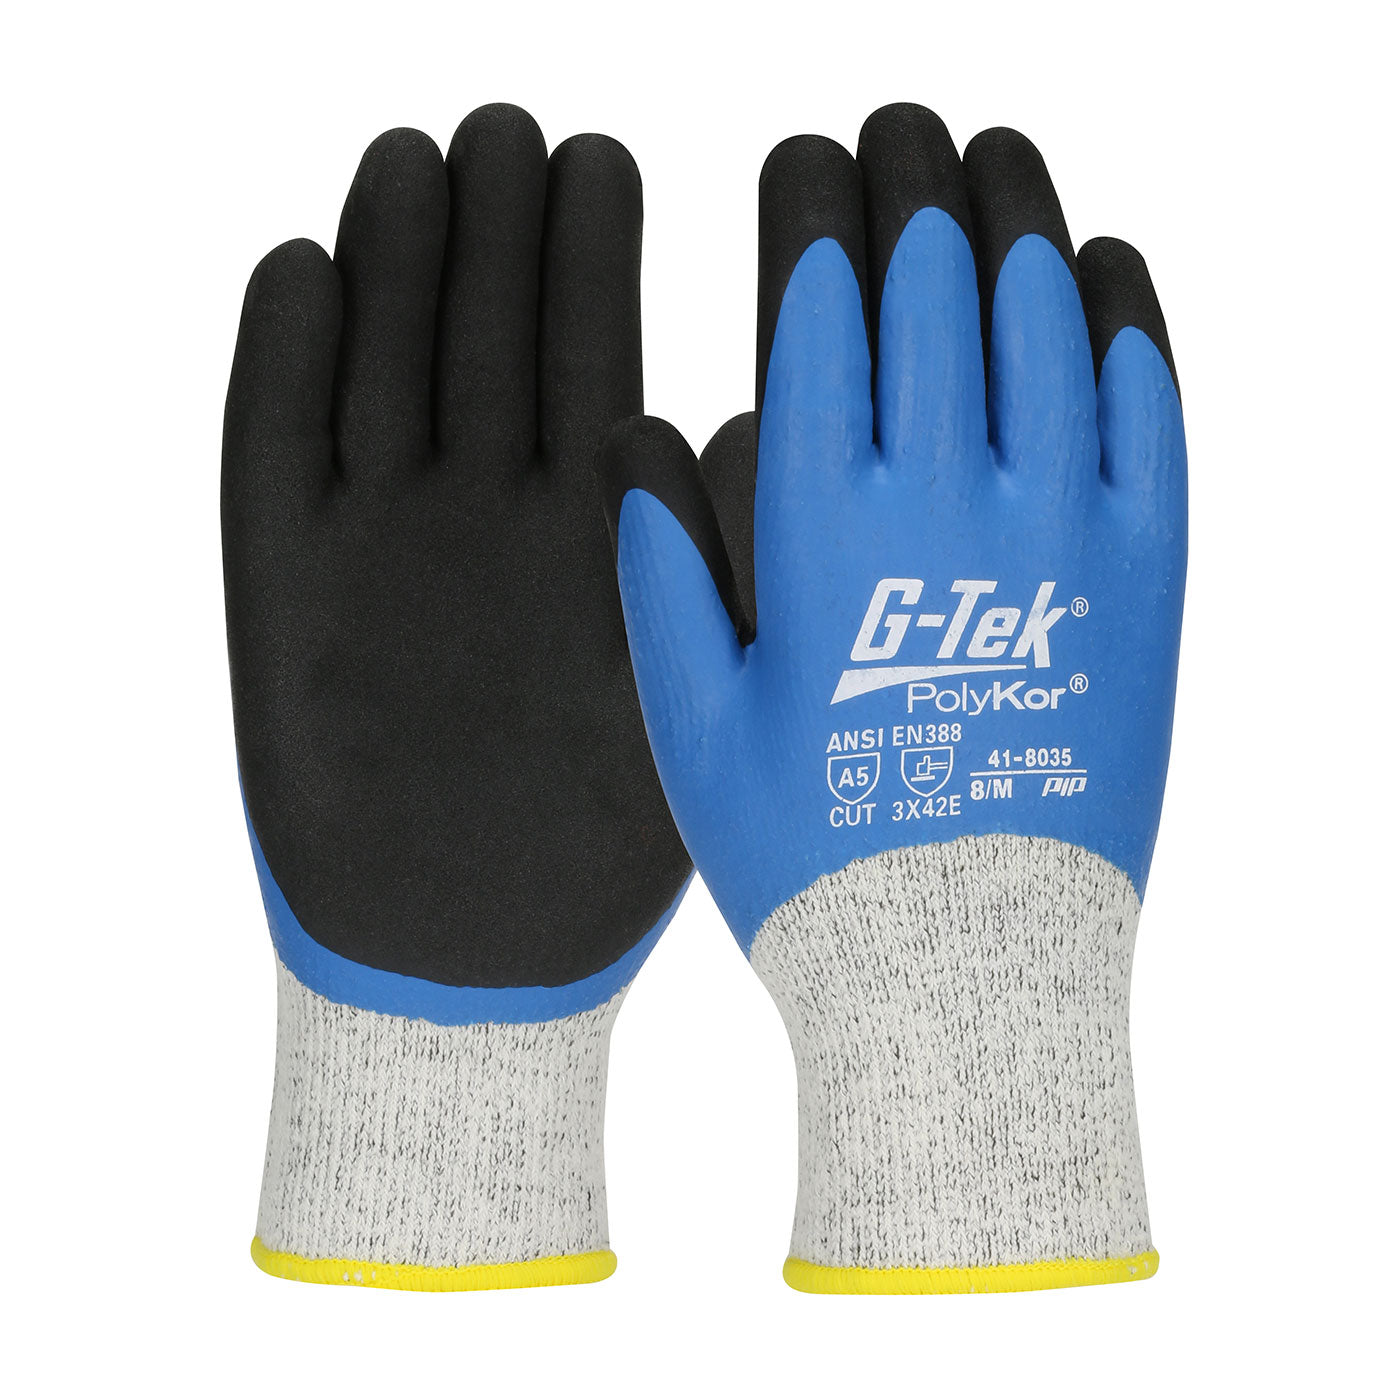 G-Tek® PolyKor® Seamless Knit Single-Layer PolyKor® / Acrylic Blended Glove with Double-Dipped Latex Coated MicroSurface Grip on Full Hand-eSafety Supplies, Inc